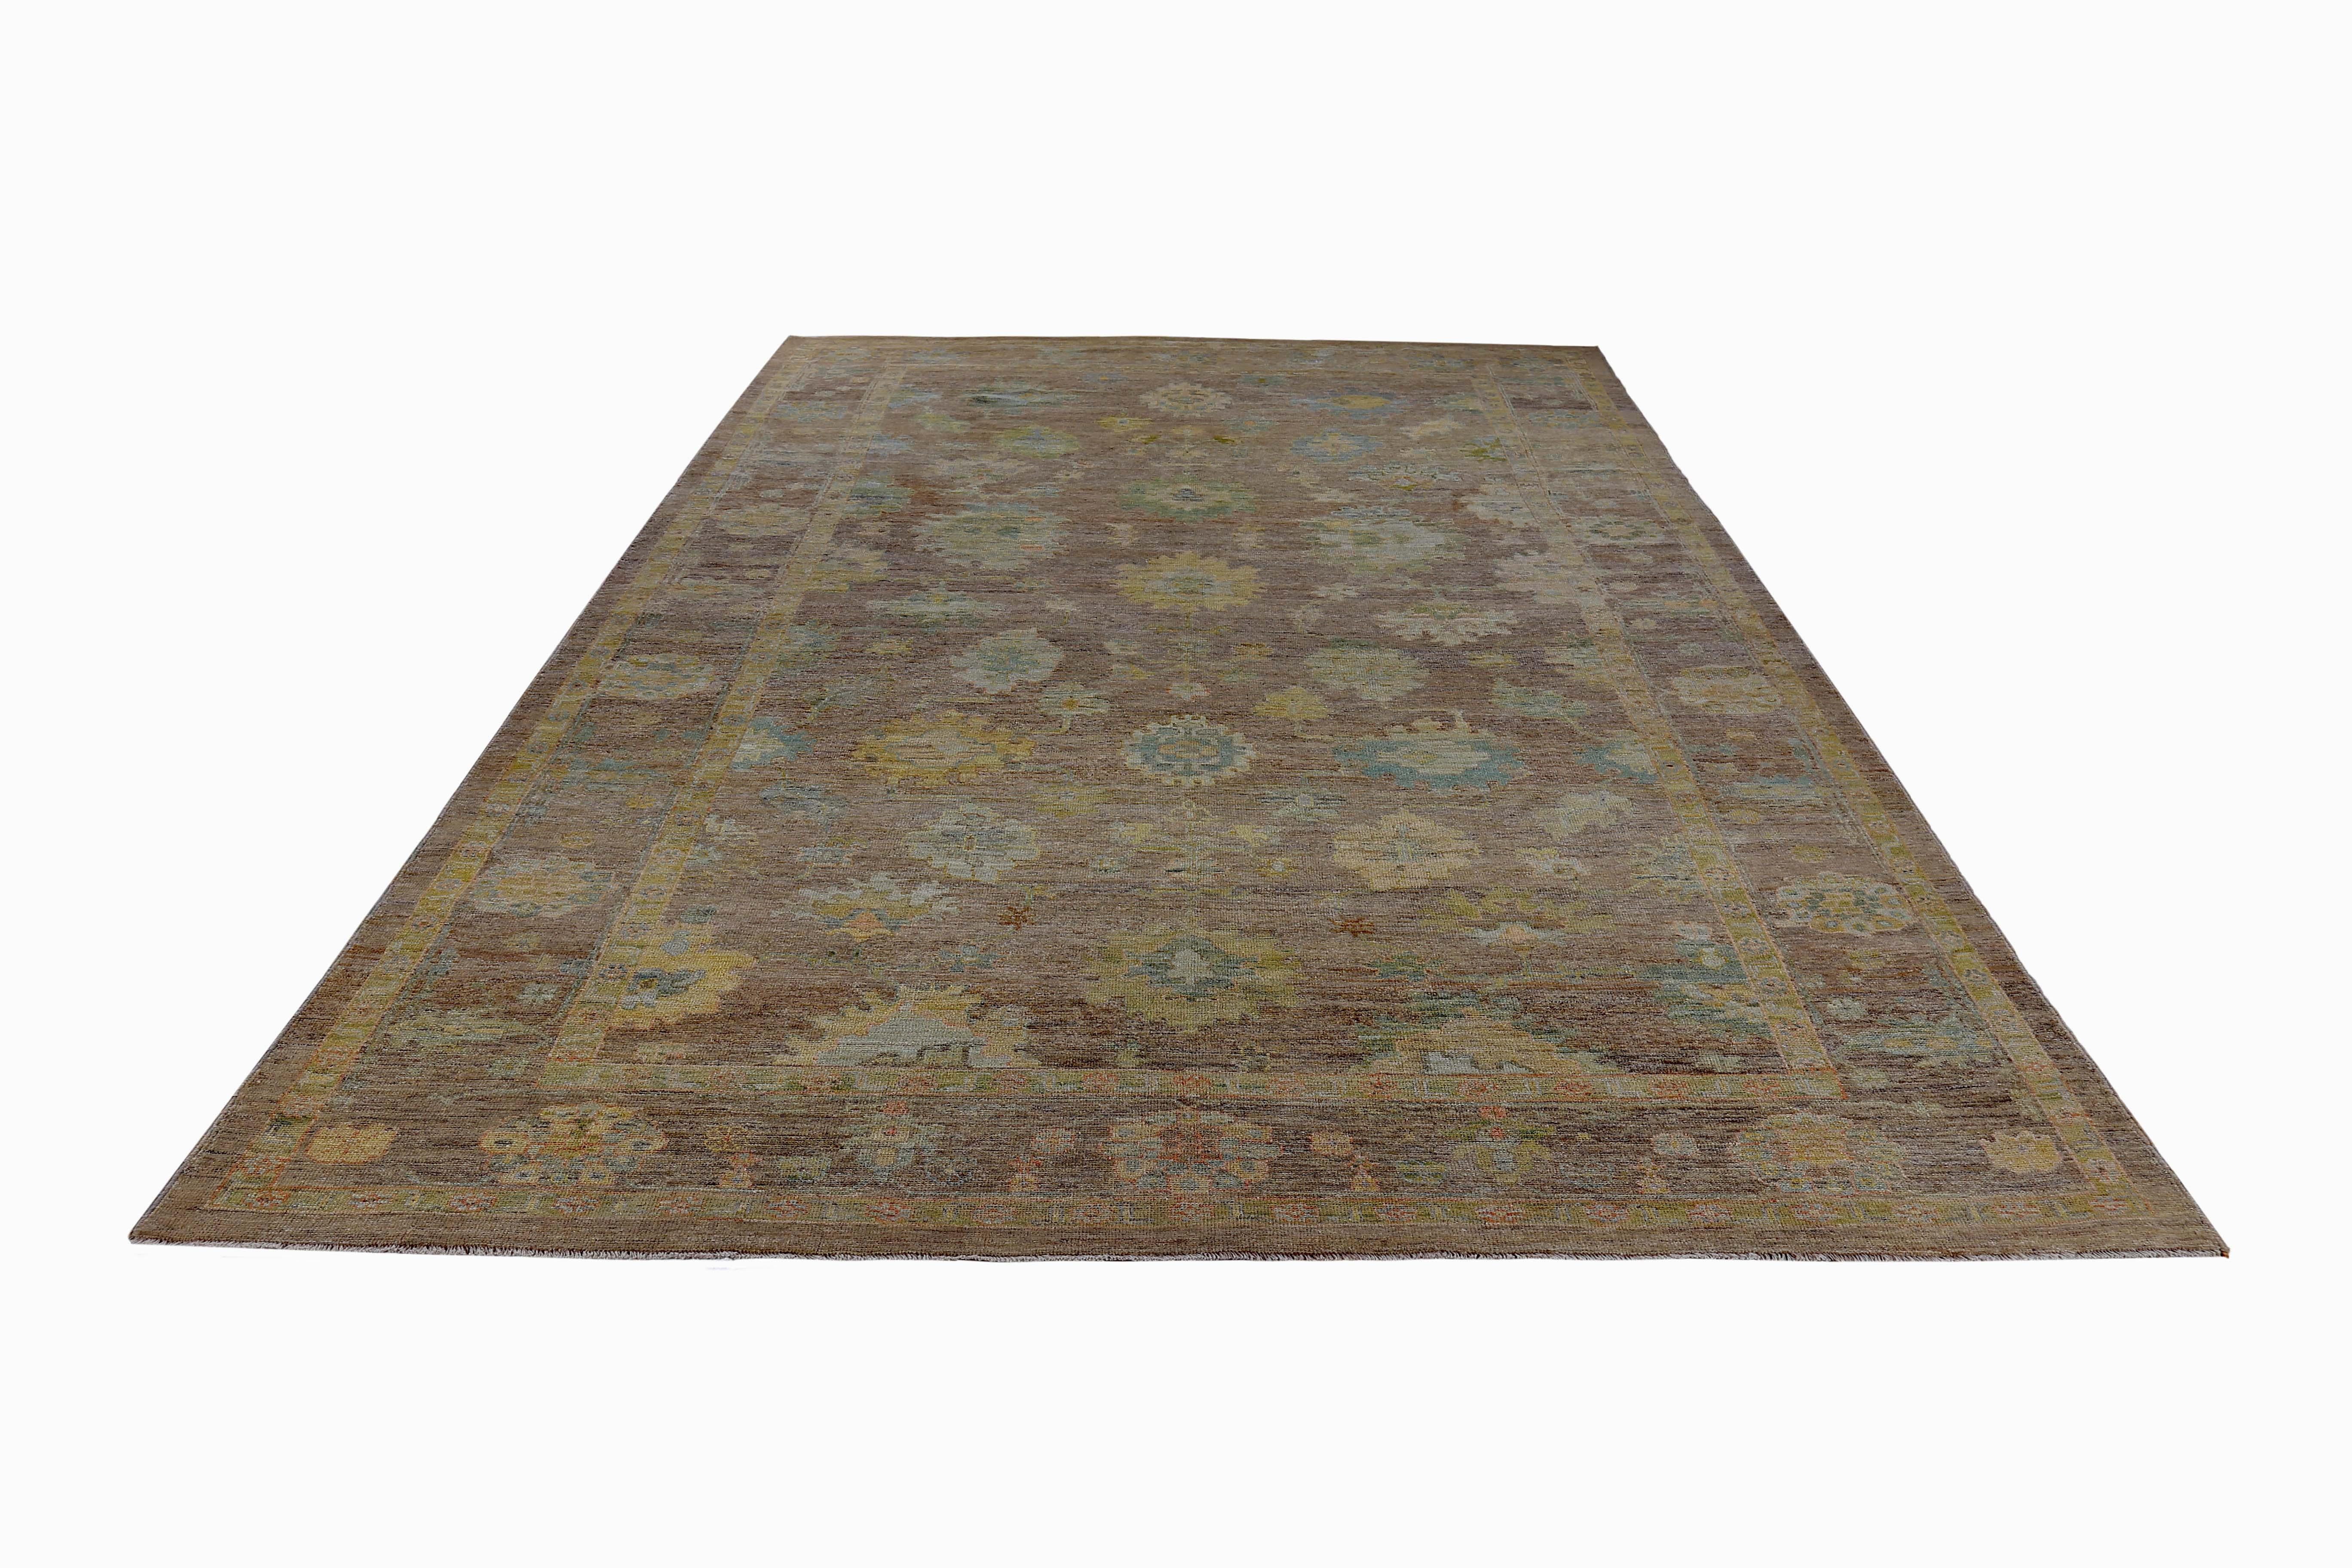 Turkish rug made of handwoven sheep’s wool of the finest quality. It’s colored with organic vegetable dyes that are certified safe for humans and pets alike. It features yellow, green and blue flower heads on a beautiful yellow field. Flower